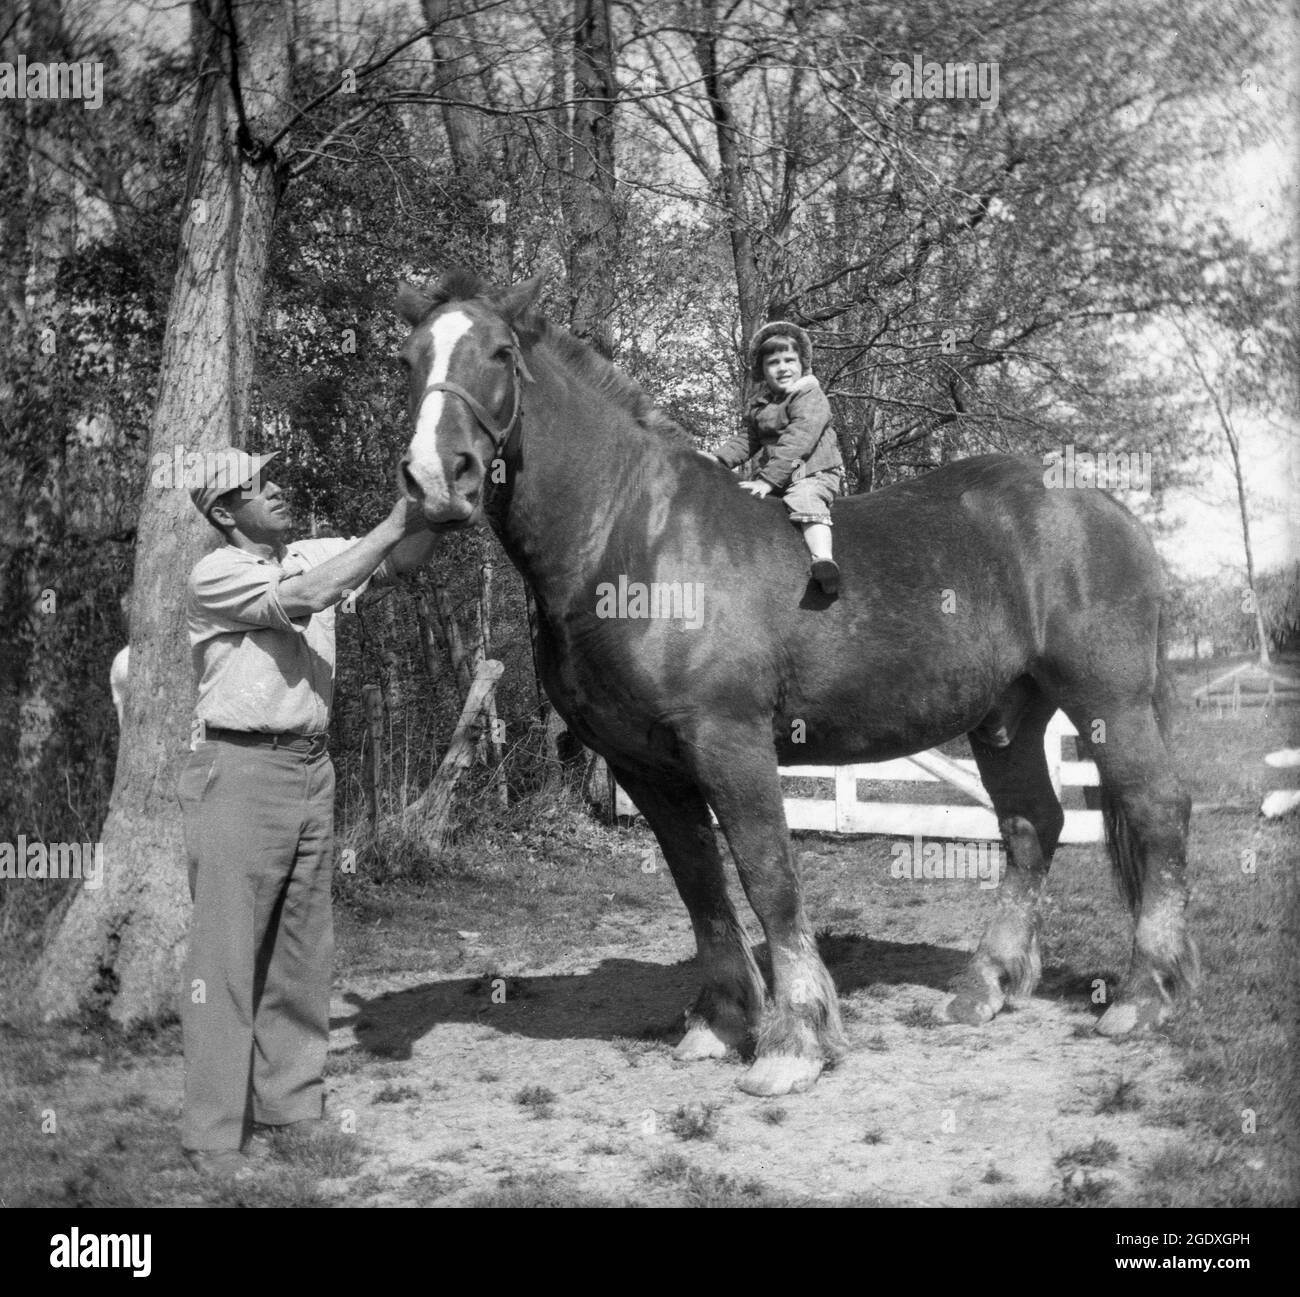 1960s, historical, outside on a farm, a small child sitting on top of a very large horse, with a farmer standing holding its head, Des Monies, USA. Although it may seem strange to see such a small child on such a large animal, draft horses as they are known, are in fact patient animals with a docile temperament. Draft horses are the largest of horse breeds and are bred for heavy farm work, such as plowing, logging or pulling loads, tasks essential for the economy before the industrial revolution and the invention of the internal combustion engine. Stock Photo